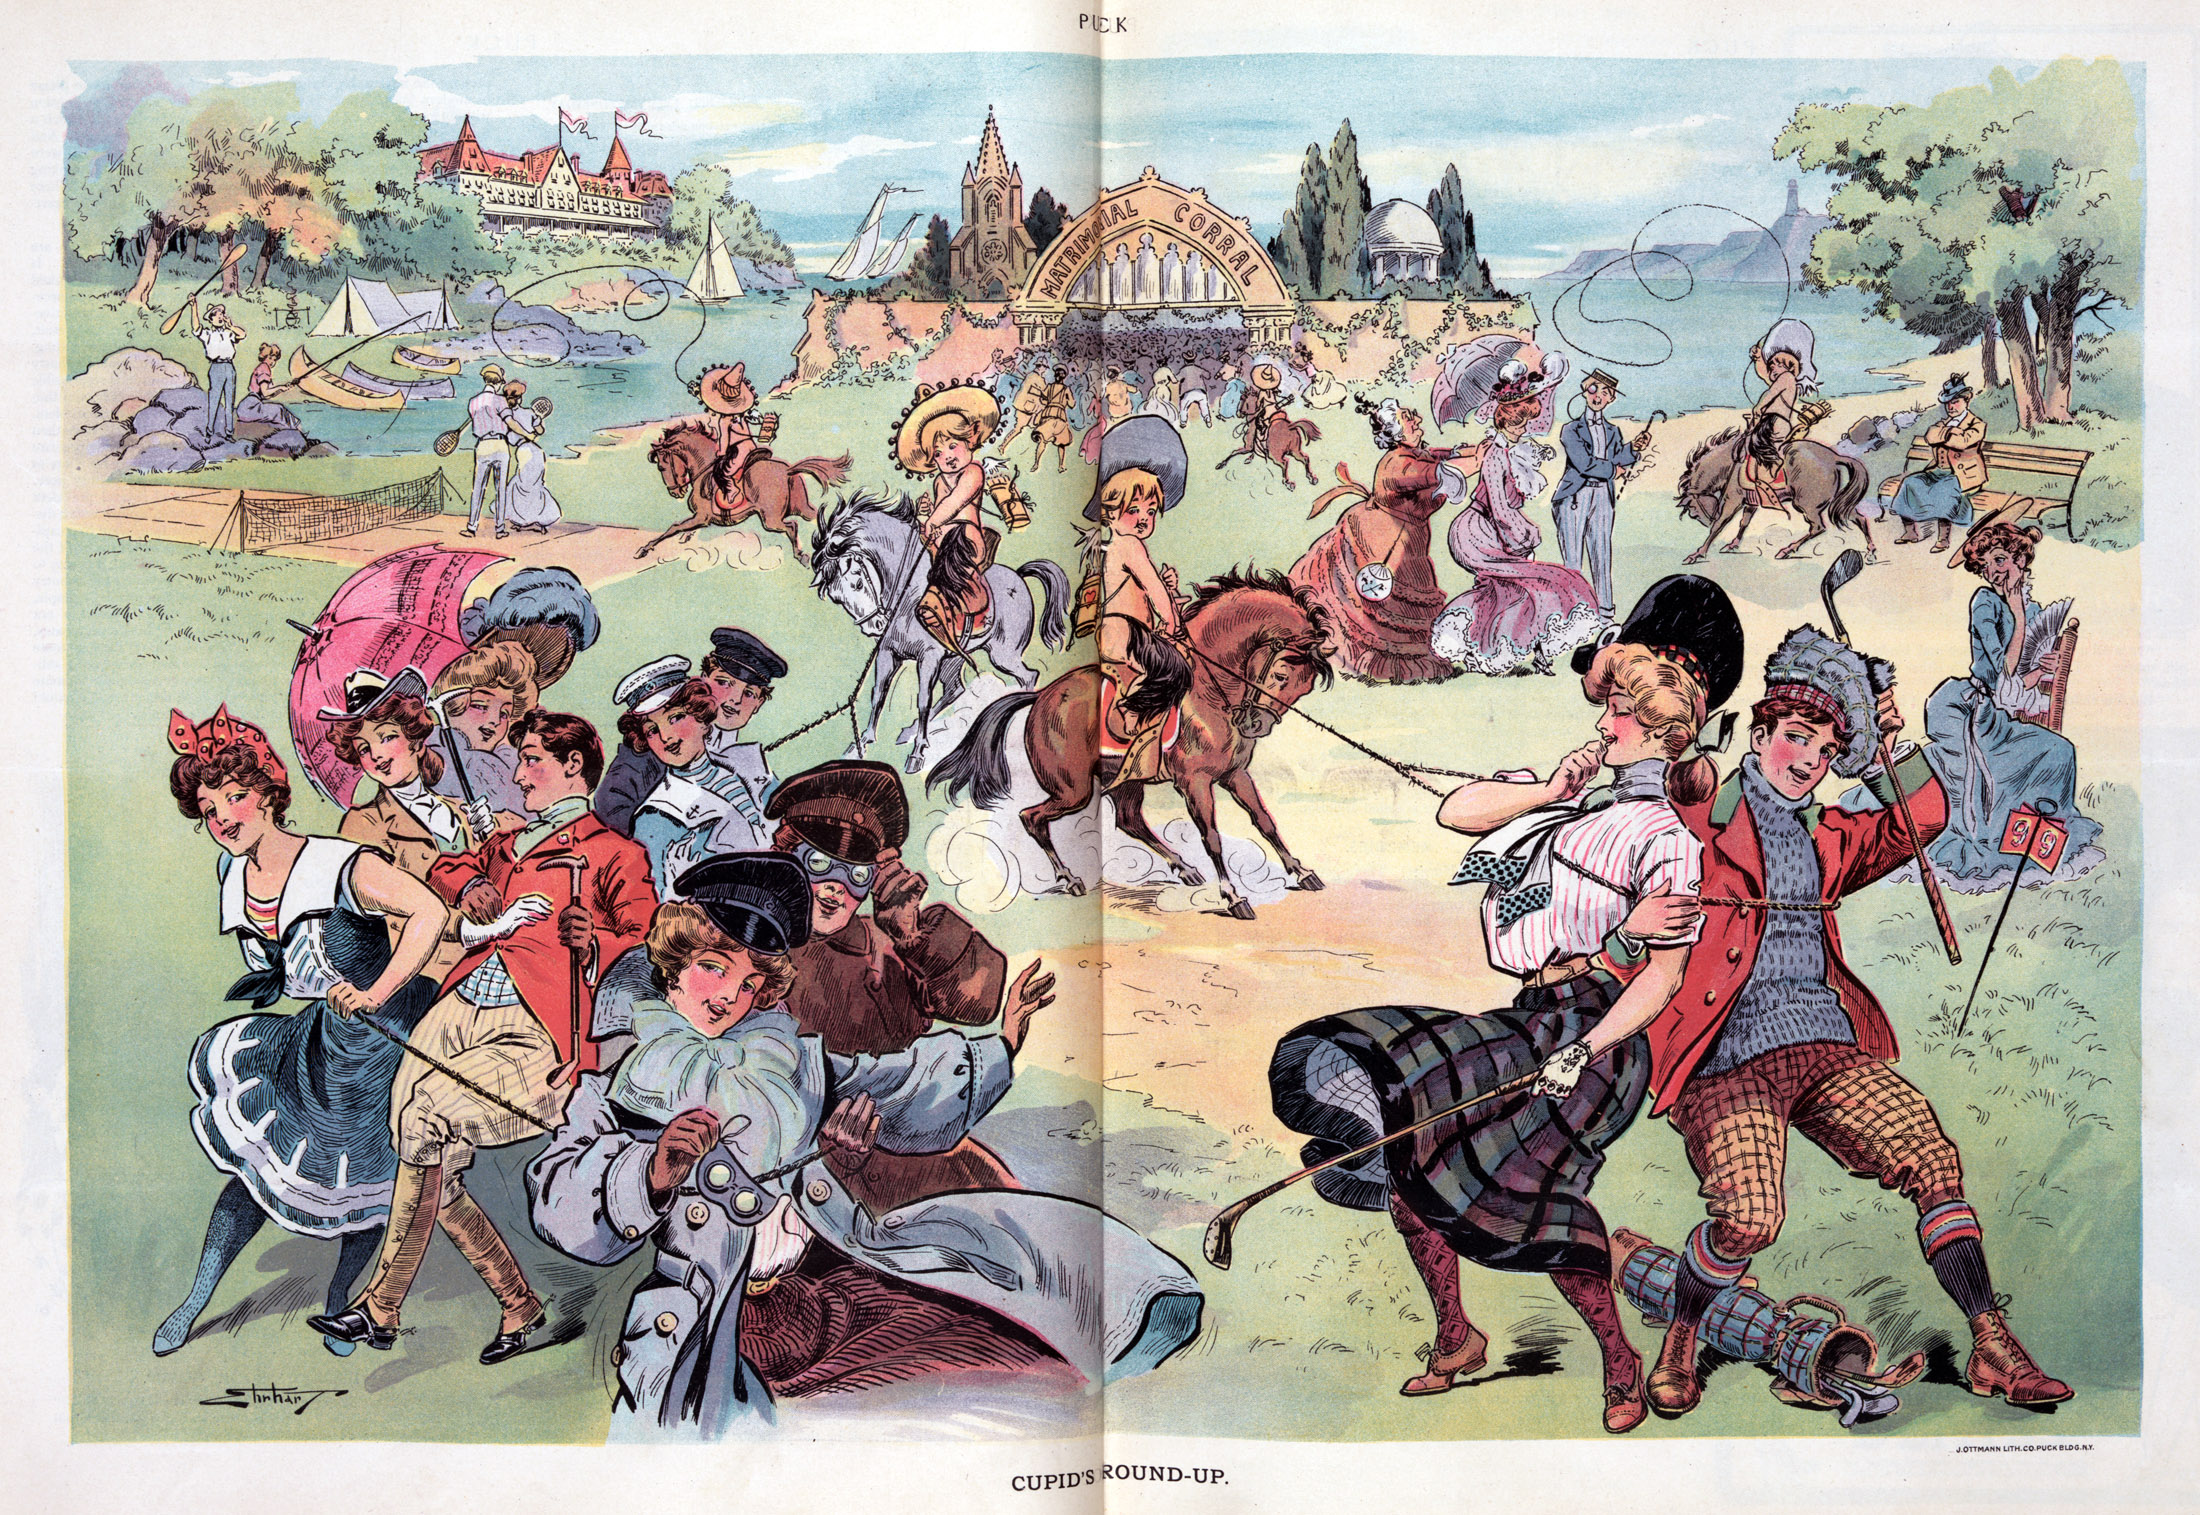 "Cupid's Round-up." Illustration by Samuel D. Ehrhart, appearing in the Sept. 9, 1903 issue of Puck. Happy Valentine's Day from Shorpy! View full size.